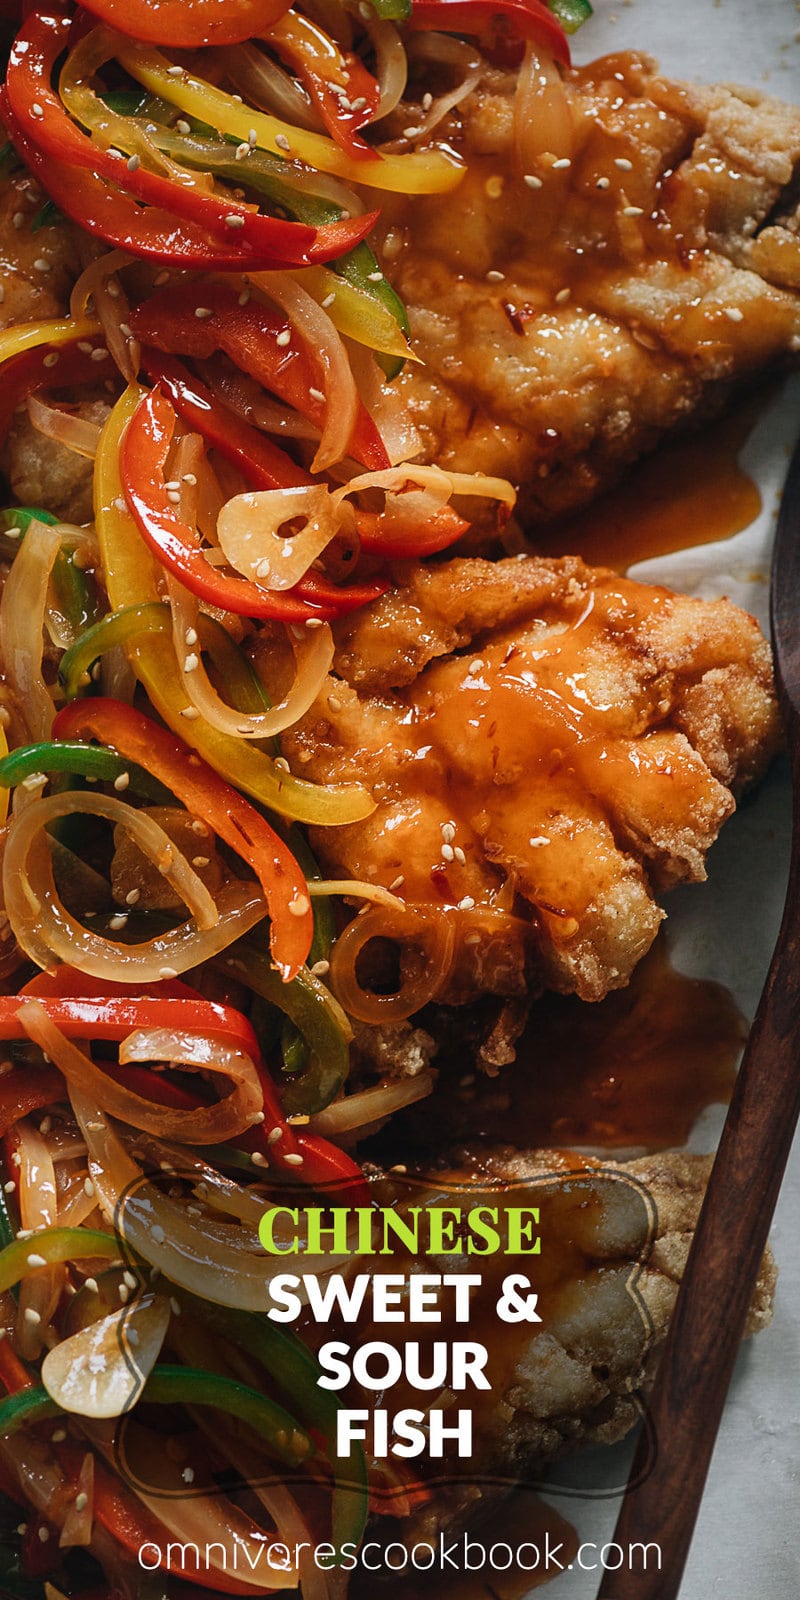 Chinese Sweet and Sour Fish (糖醋鱼) | This recipe uses fish fillets to create a stunning presentation while keeping the cooking process as easy as possible. The fish is shallow-fried until super crispy and then drizzled with a rich and aromatic sauce that is loaded with colorful peppers. It’s a perfect dish to serve at your dinner party, for Chinese New Year, or for other Chinese festivals. {Gluten-Free Adaptable}